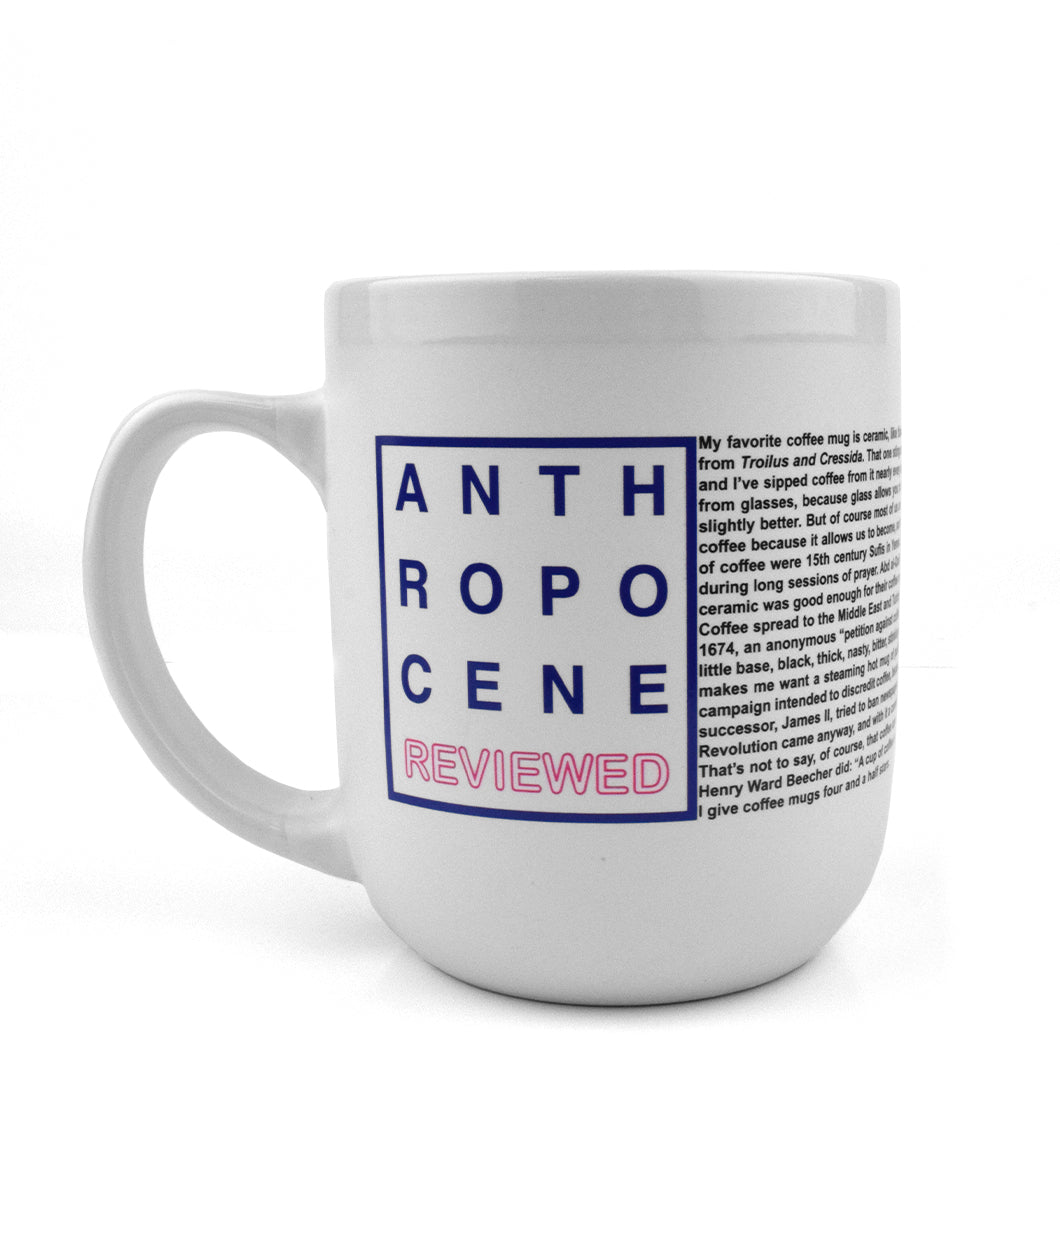 A white mug. “Anthropocene” is in blue sans serif font, the word broken up with four letters per line. “Reviewed” is in white sans serif font with red outline below. All are surrounded by a blue square with white fill. To the right, small black text wraps around the mug, matching the height of the square. - from The Anthropocene Reviewed